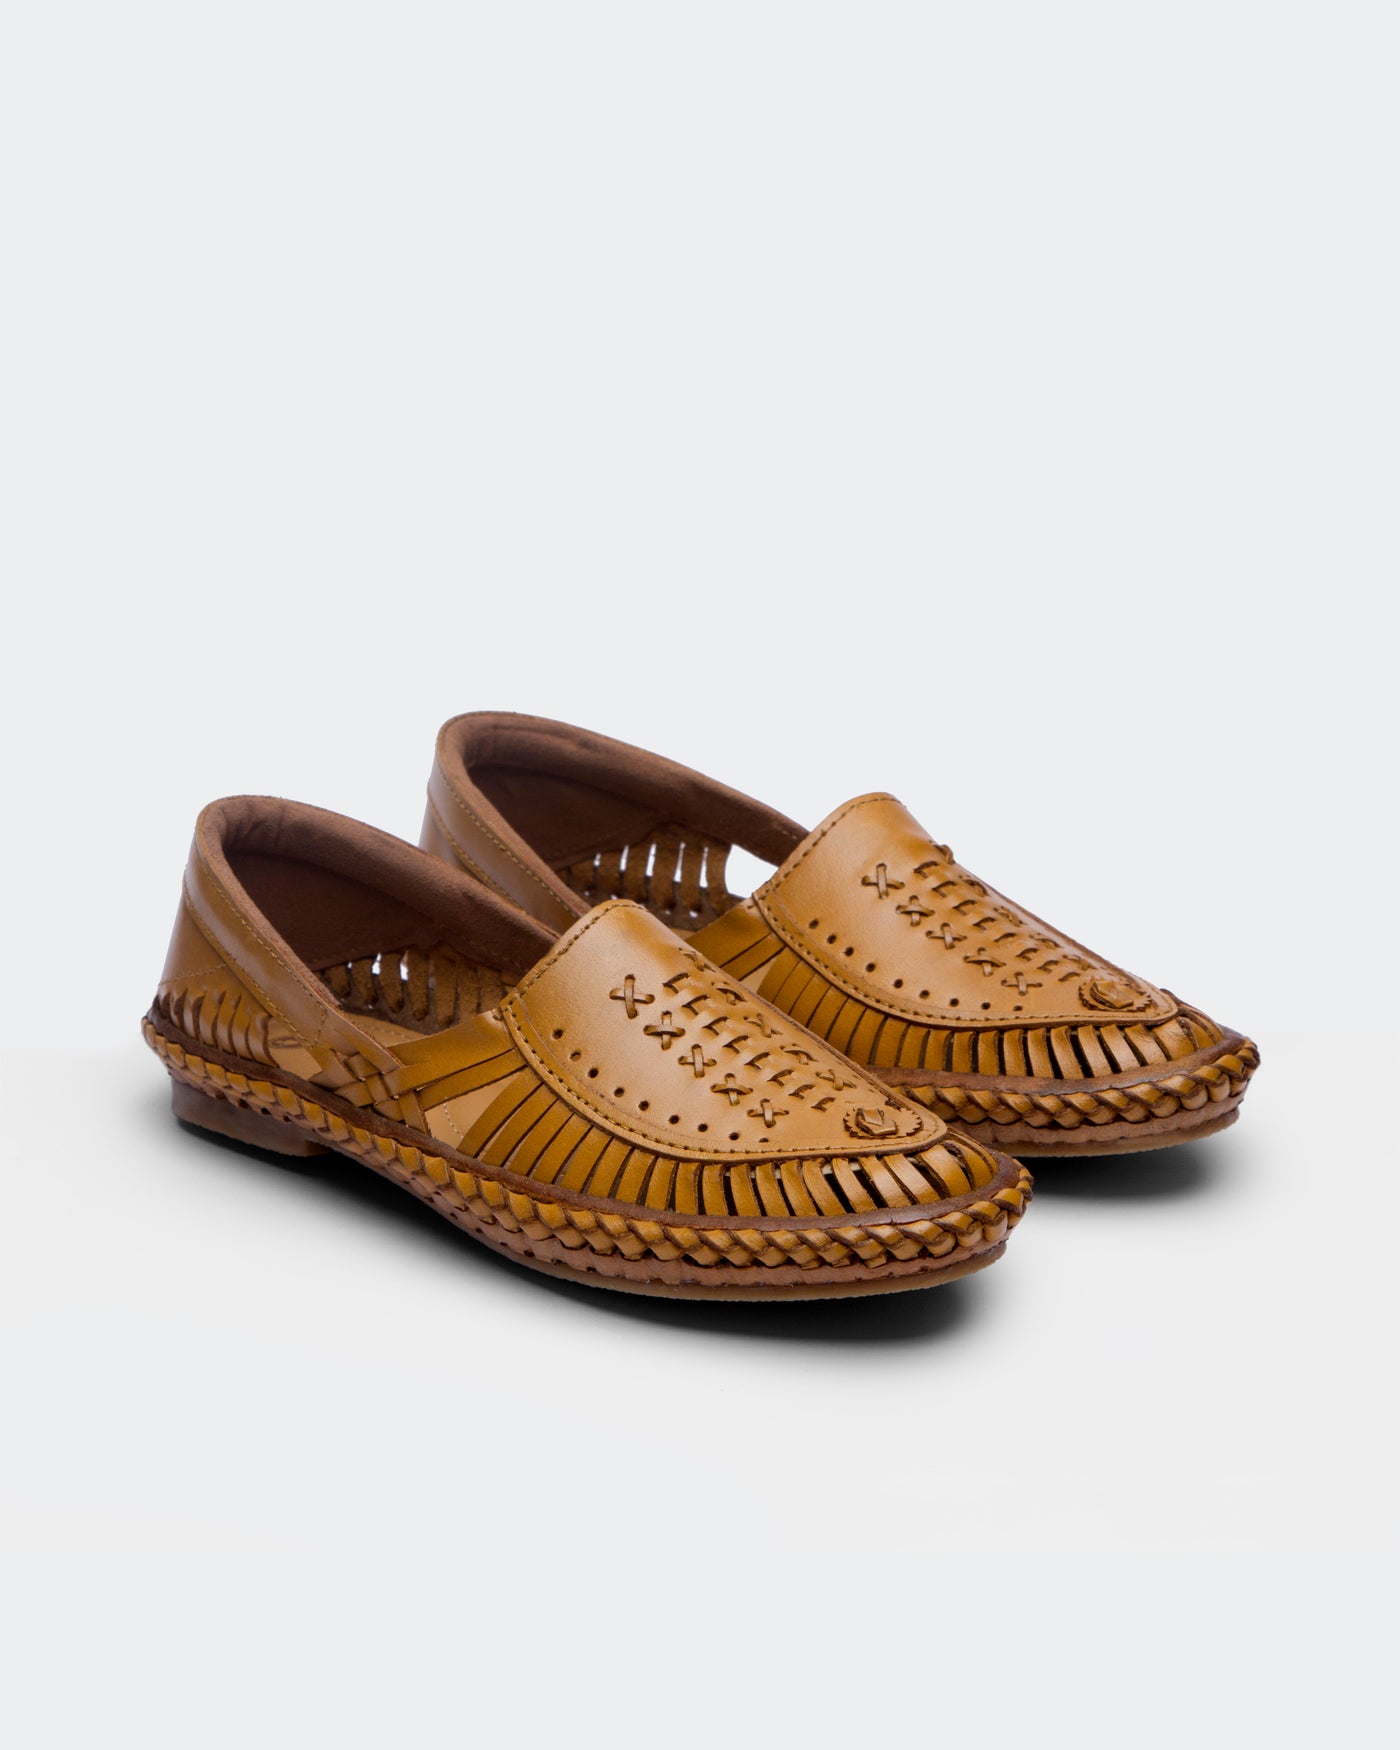 Fireworkshouse-handmade-leather-shoes-ATISTOCRAT NATURAL